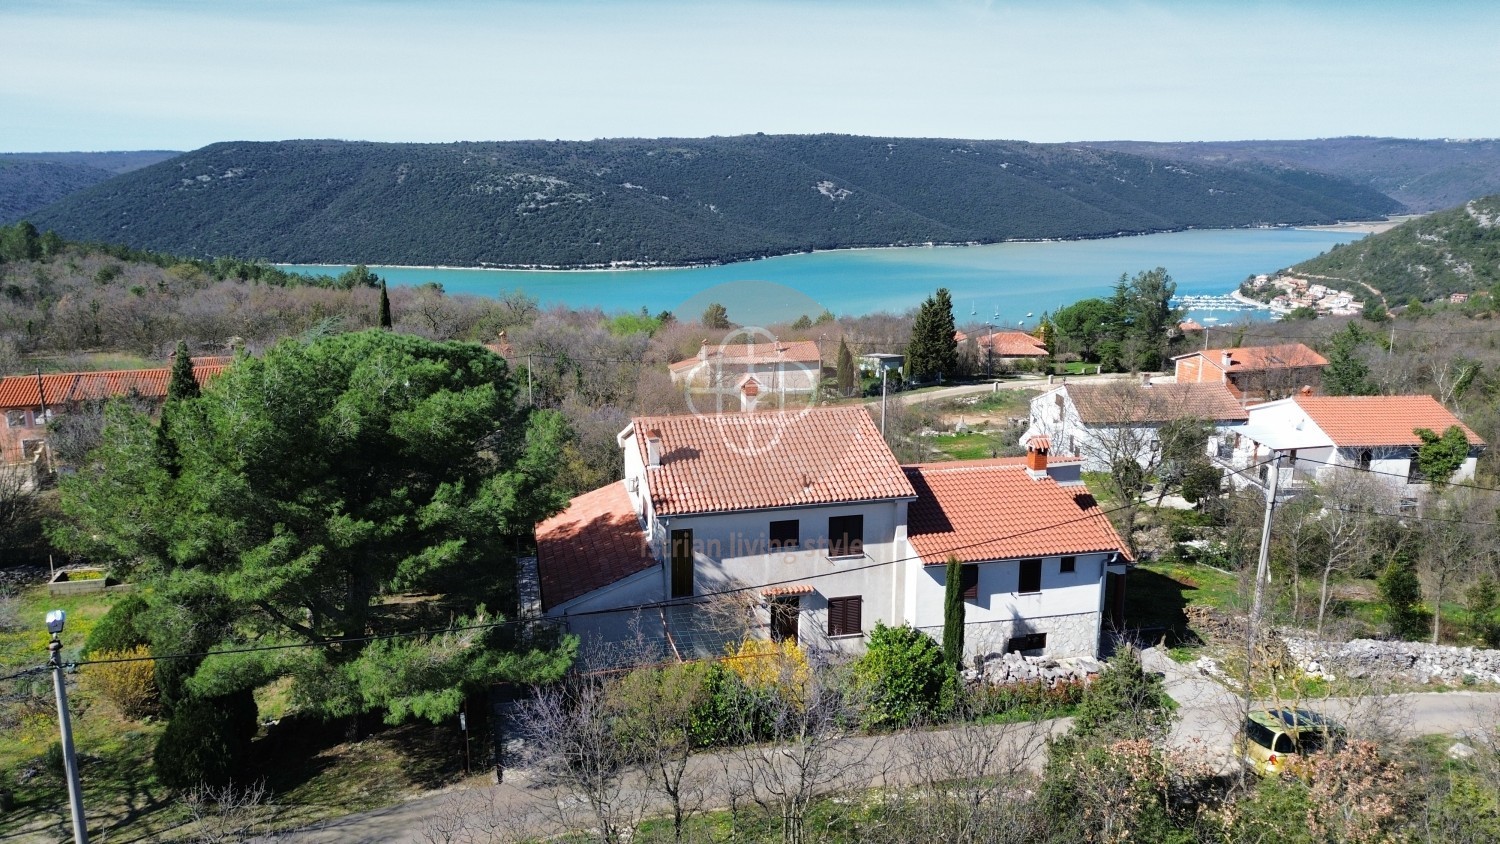 Semi-detached house with sea view # 2 apartments + basement # Istria Accommodation in Rasa